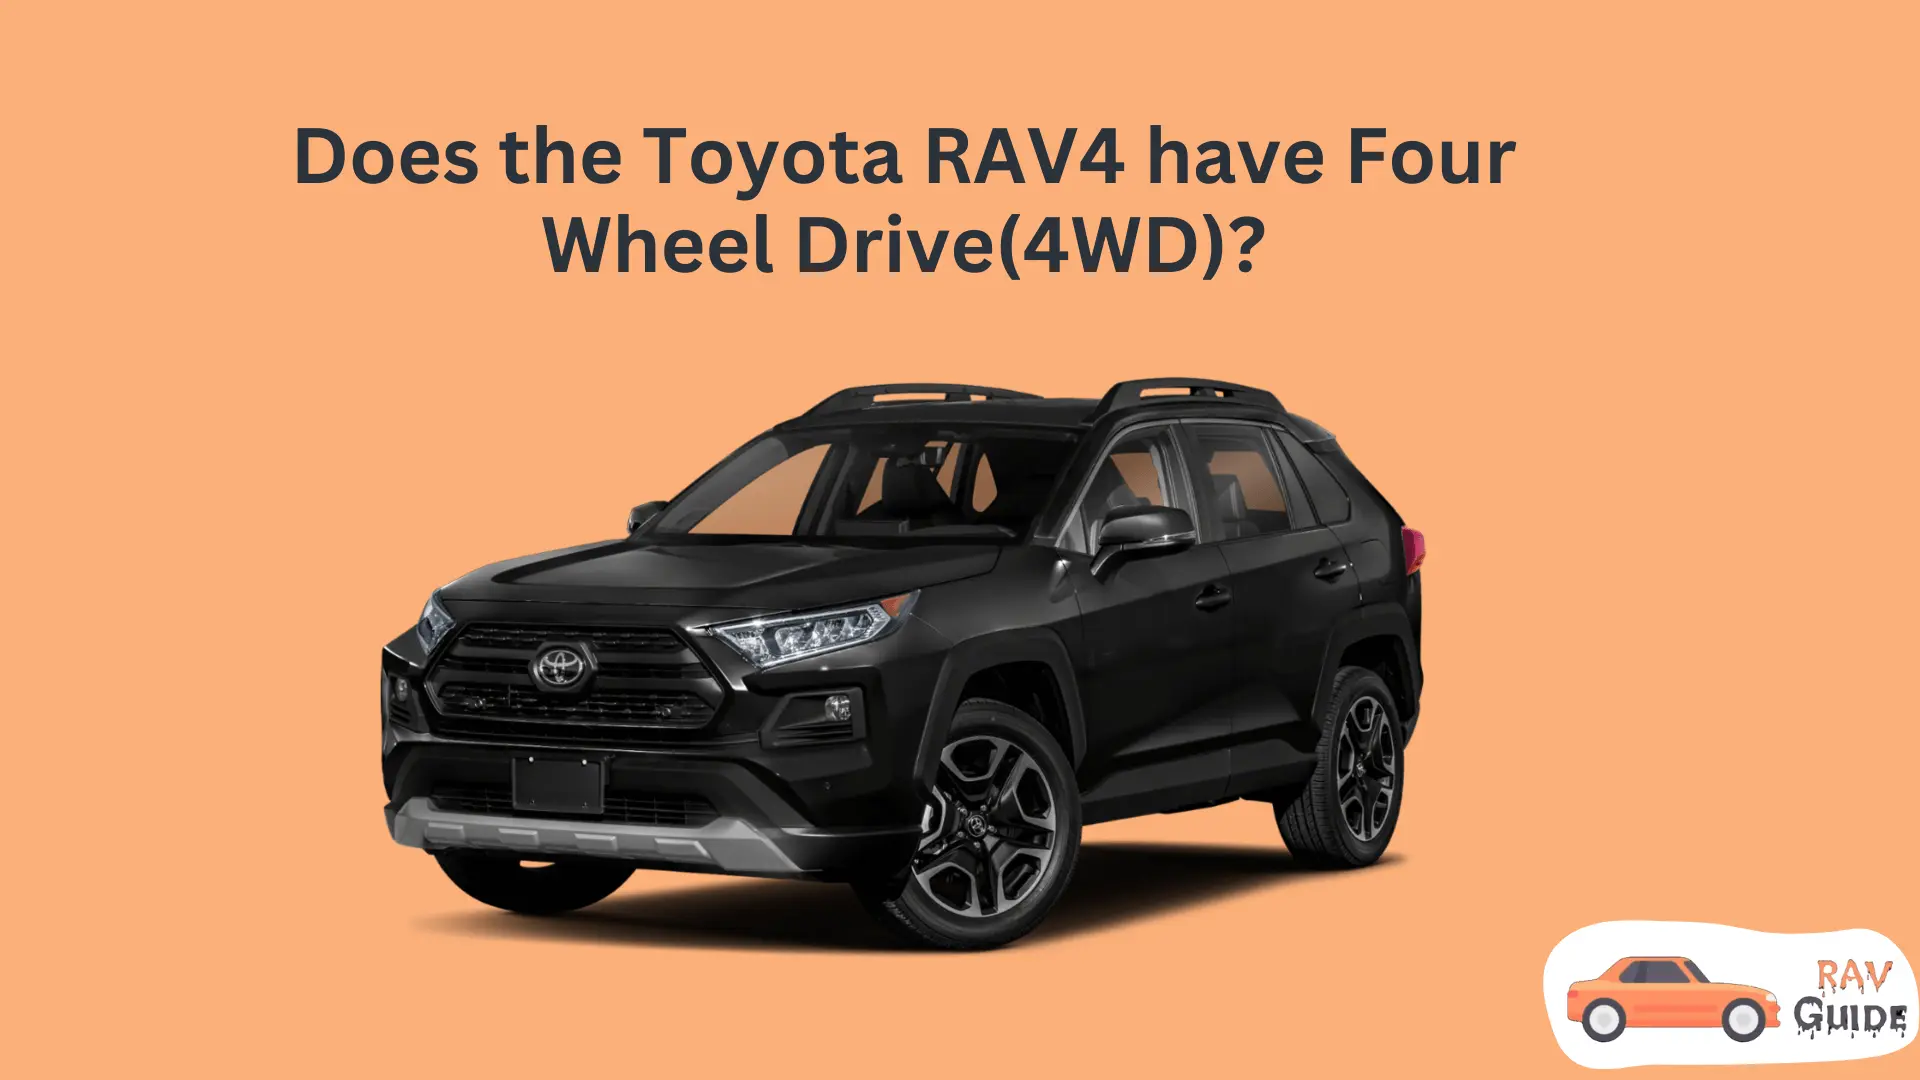 Does Toyota RAV4 have 4WD